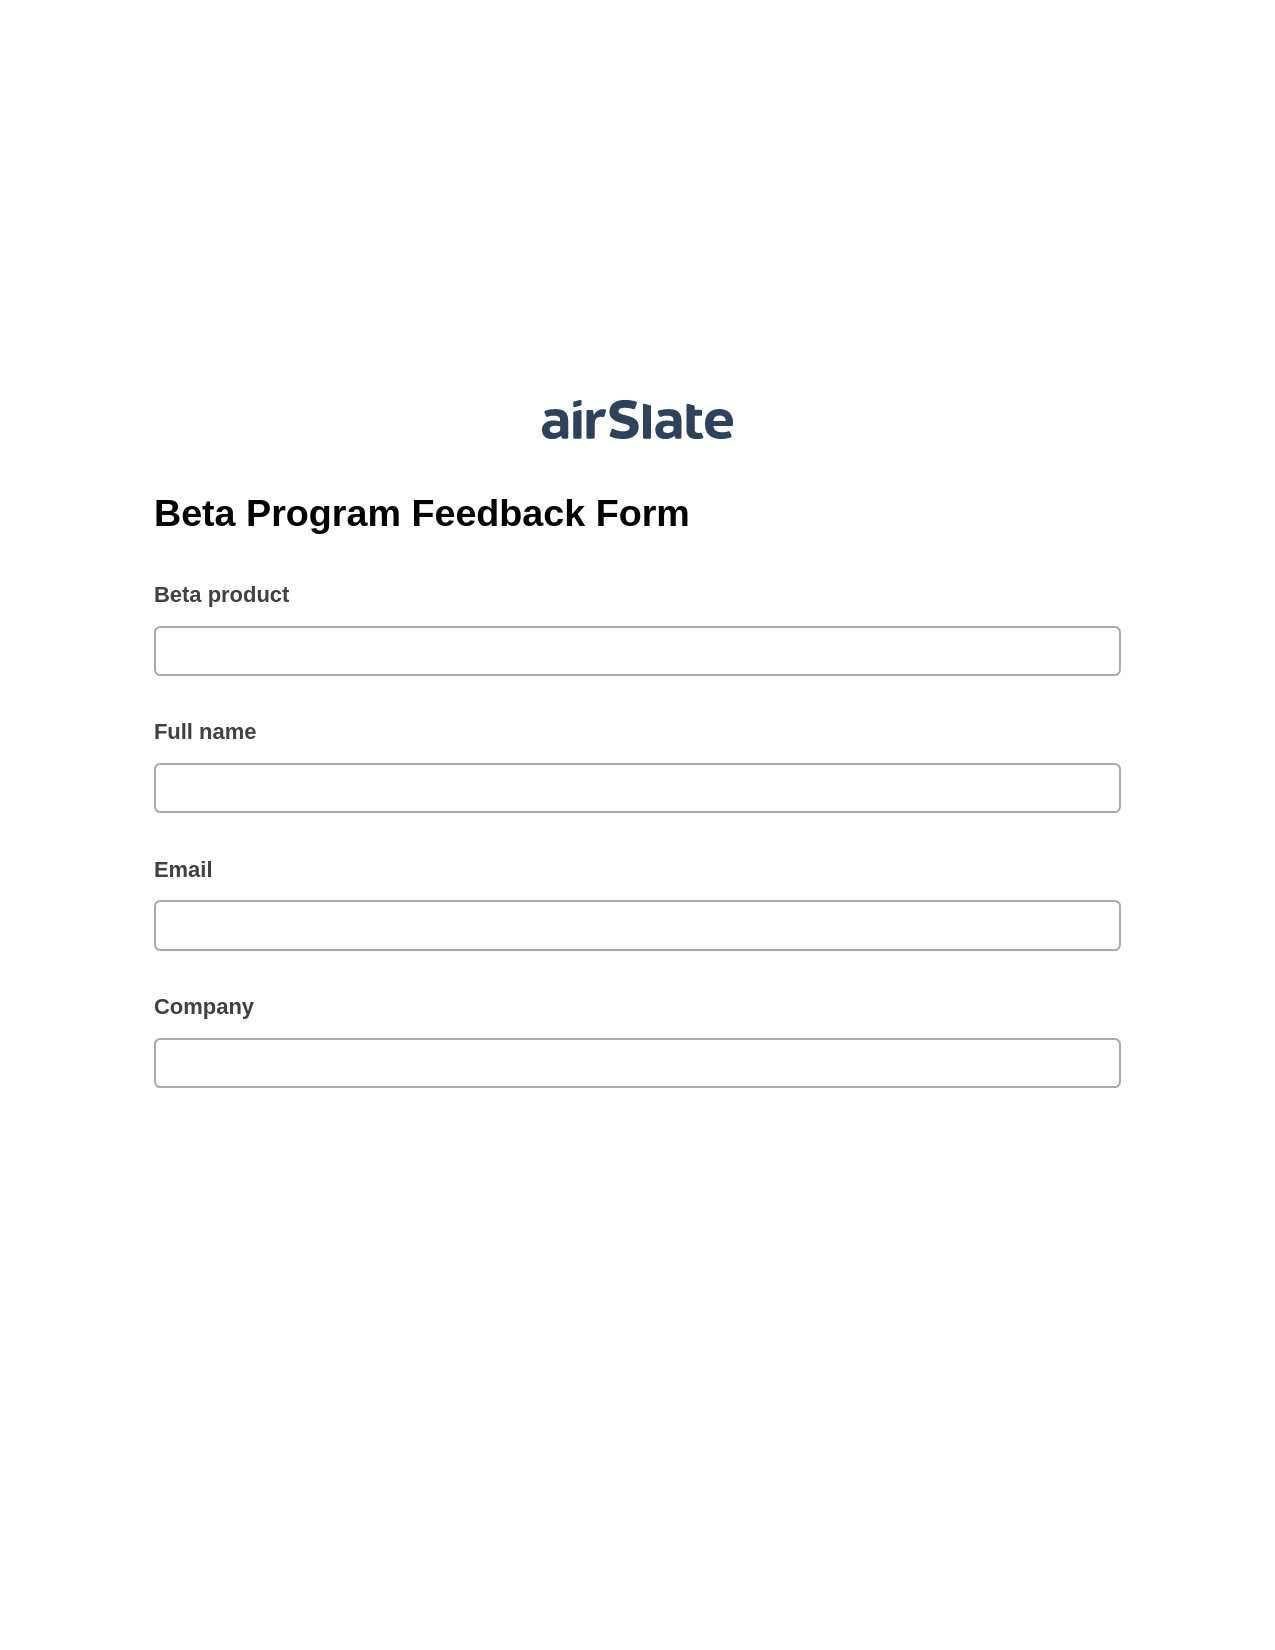 Beta Program Feedback Form Pre-fill from Salesforce Record Bot, Send Mailchimp Campaign Bot, Export to Excel 365 Bot